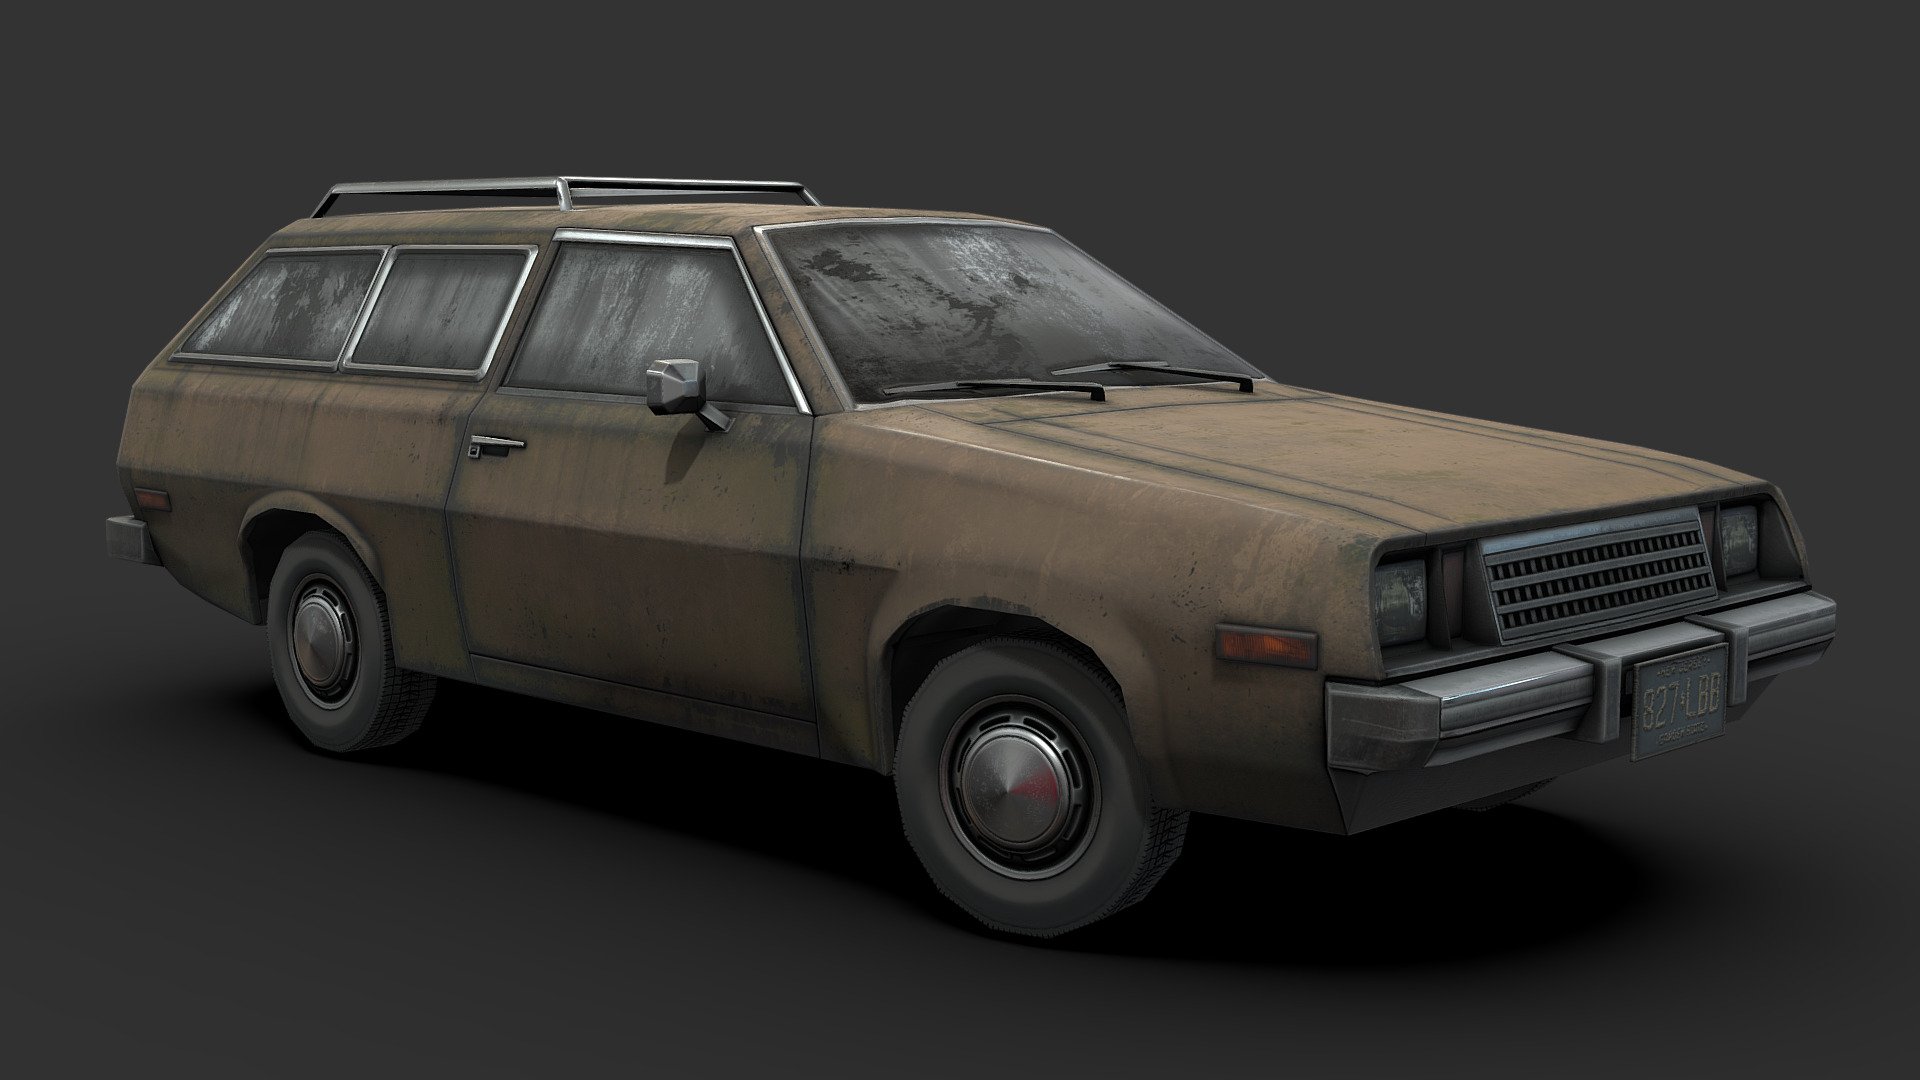 Part of a new series of background vehicles I’ve been working on, this time a late 70s compact wagon. Sorry for the slow posting, trying to find work right now is really hard (and a total bummer)

Made in 3DSMax and Substance Painter

Questions? Interested in a custom model? Want me working on your project? Feel free to contact me via artstation at: https://www.artstation.com/renafox3d - '79 Wagon - Buy Royalty Free 3D model by Renafox (@kryik1023) 3d model